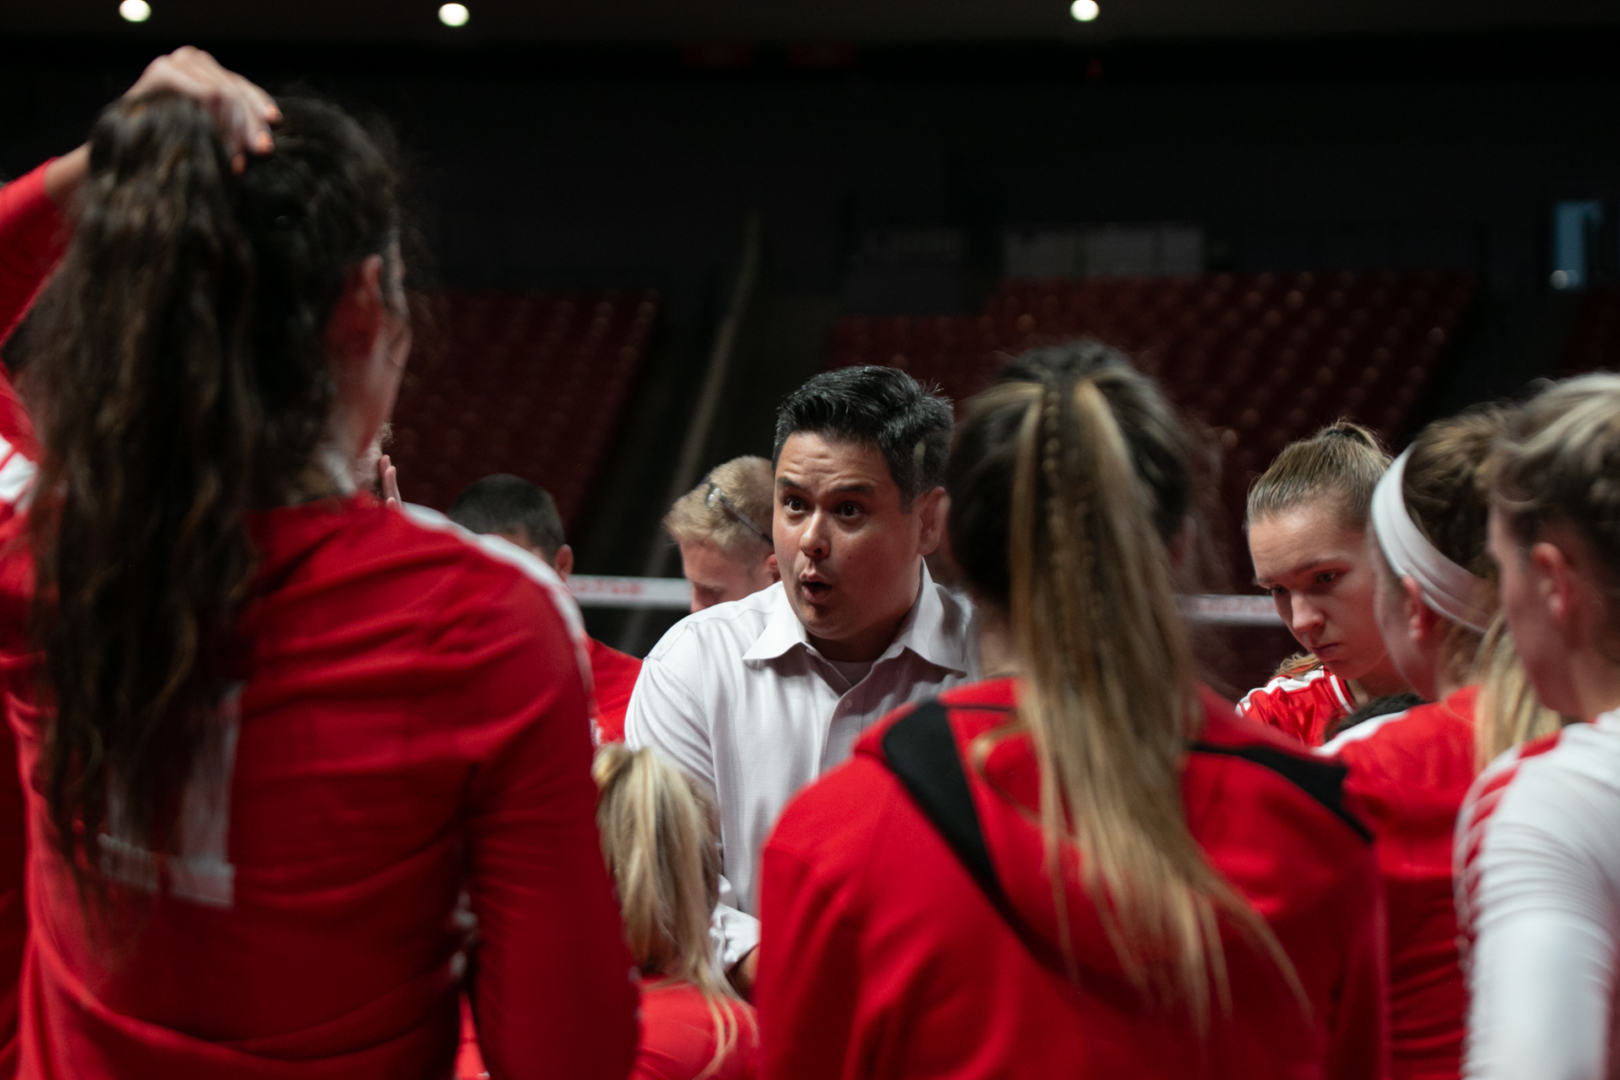 UH volleyball head coach David Rehr talks to his team during a game in 2019. | Kathryn Lenihan/The Cougar